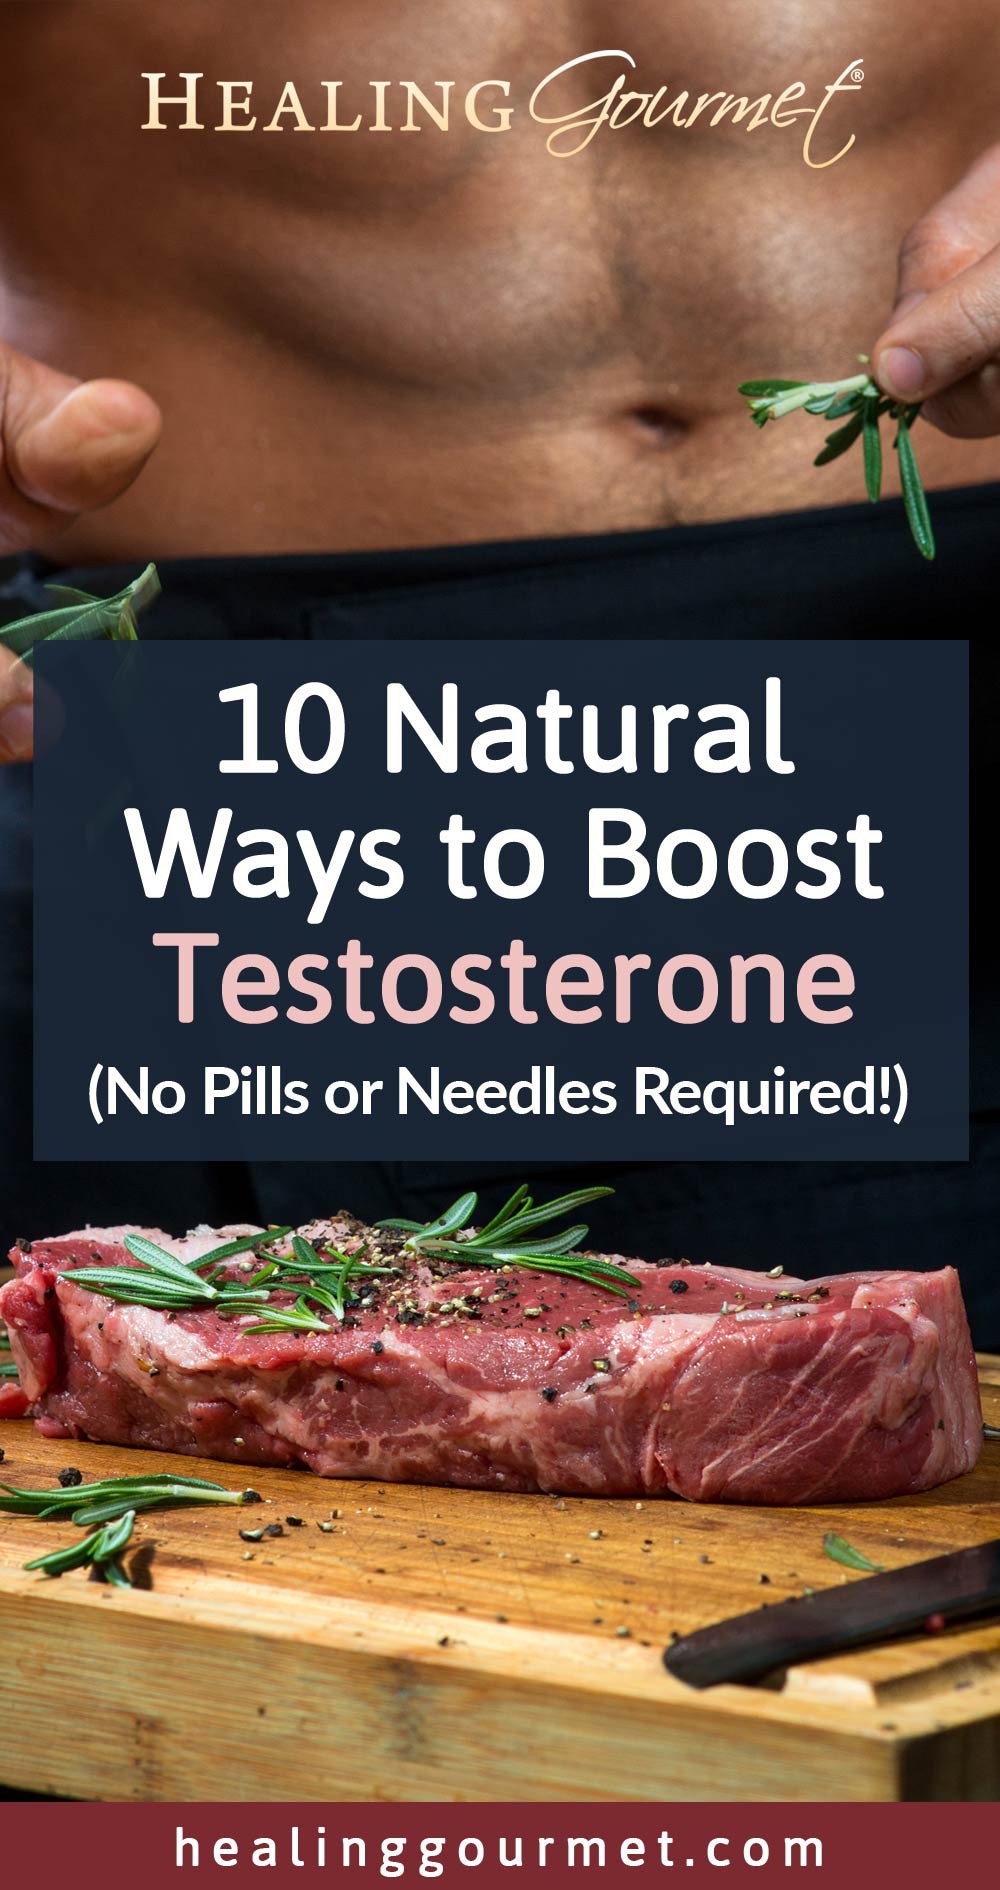 Foods That Boost Testosterone...Naturally